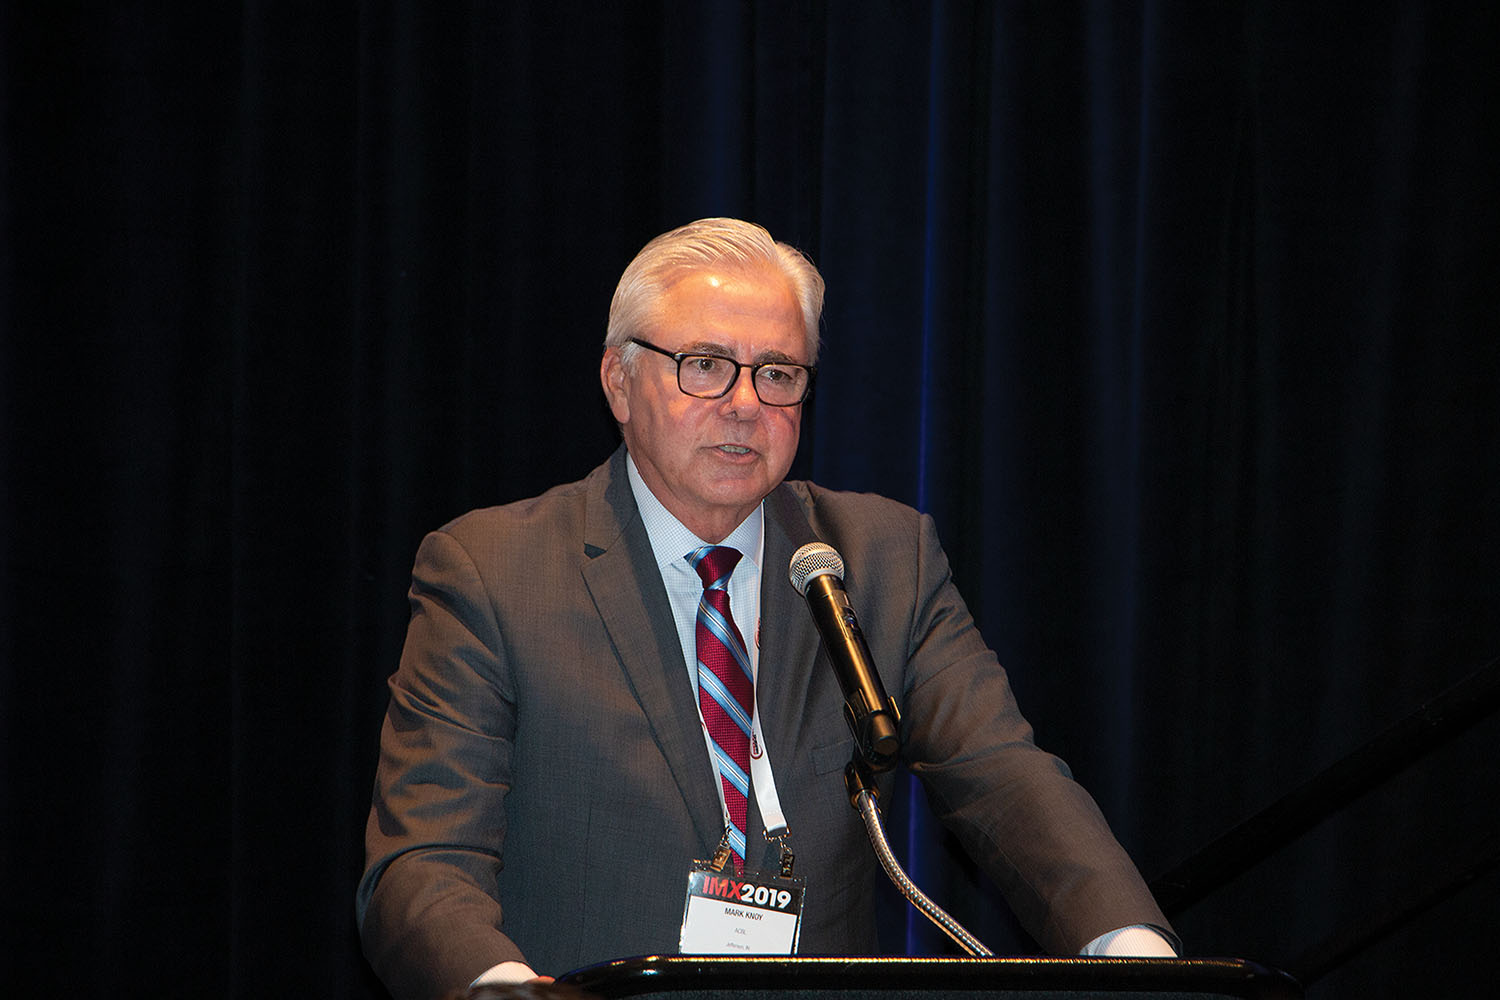 Mark Knoy, president and CEO of American Commercial Barge Line, speaks during IMX general session on May 22. (Photo by John Shoulberg)